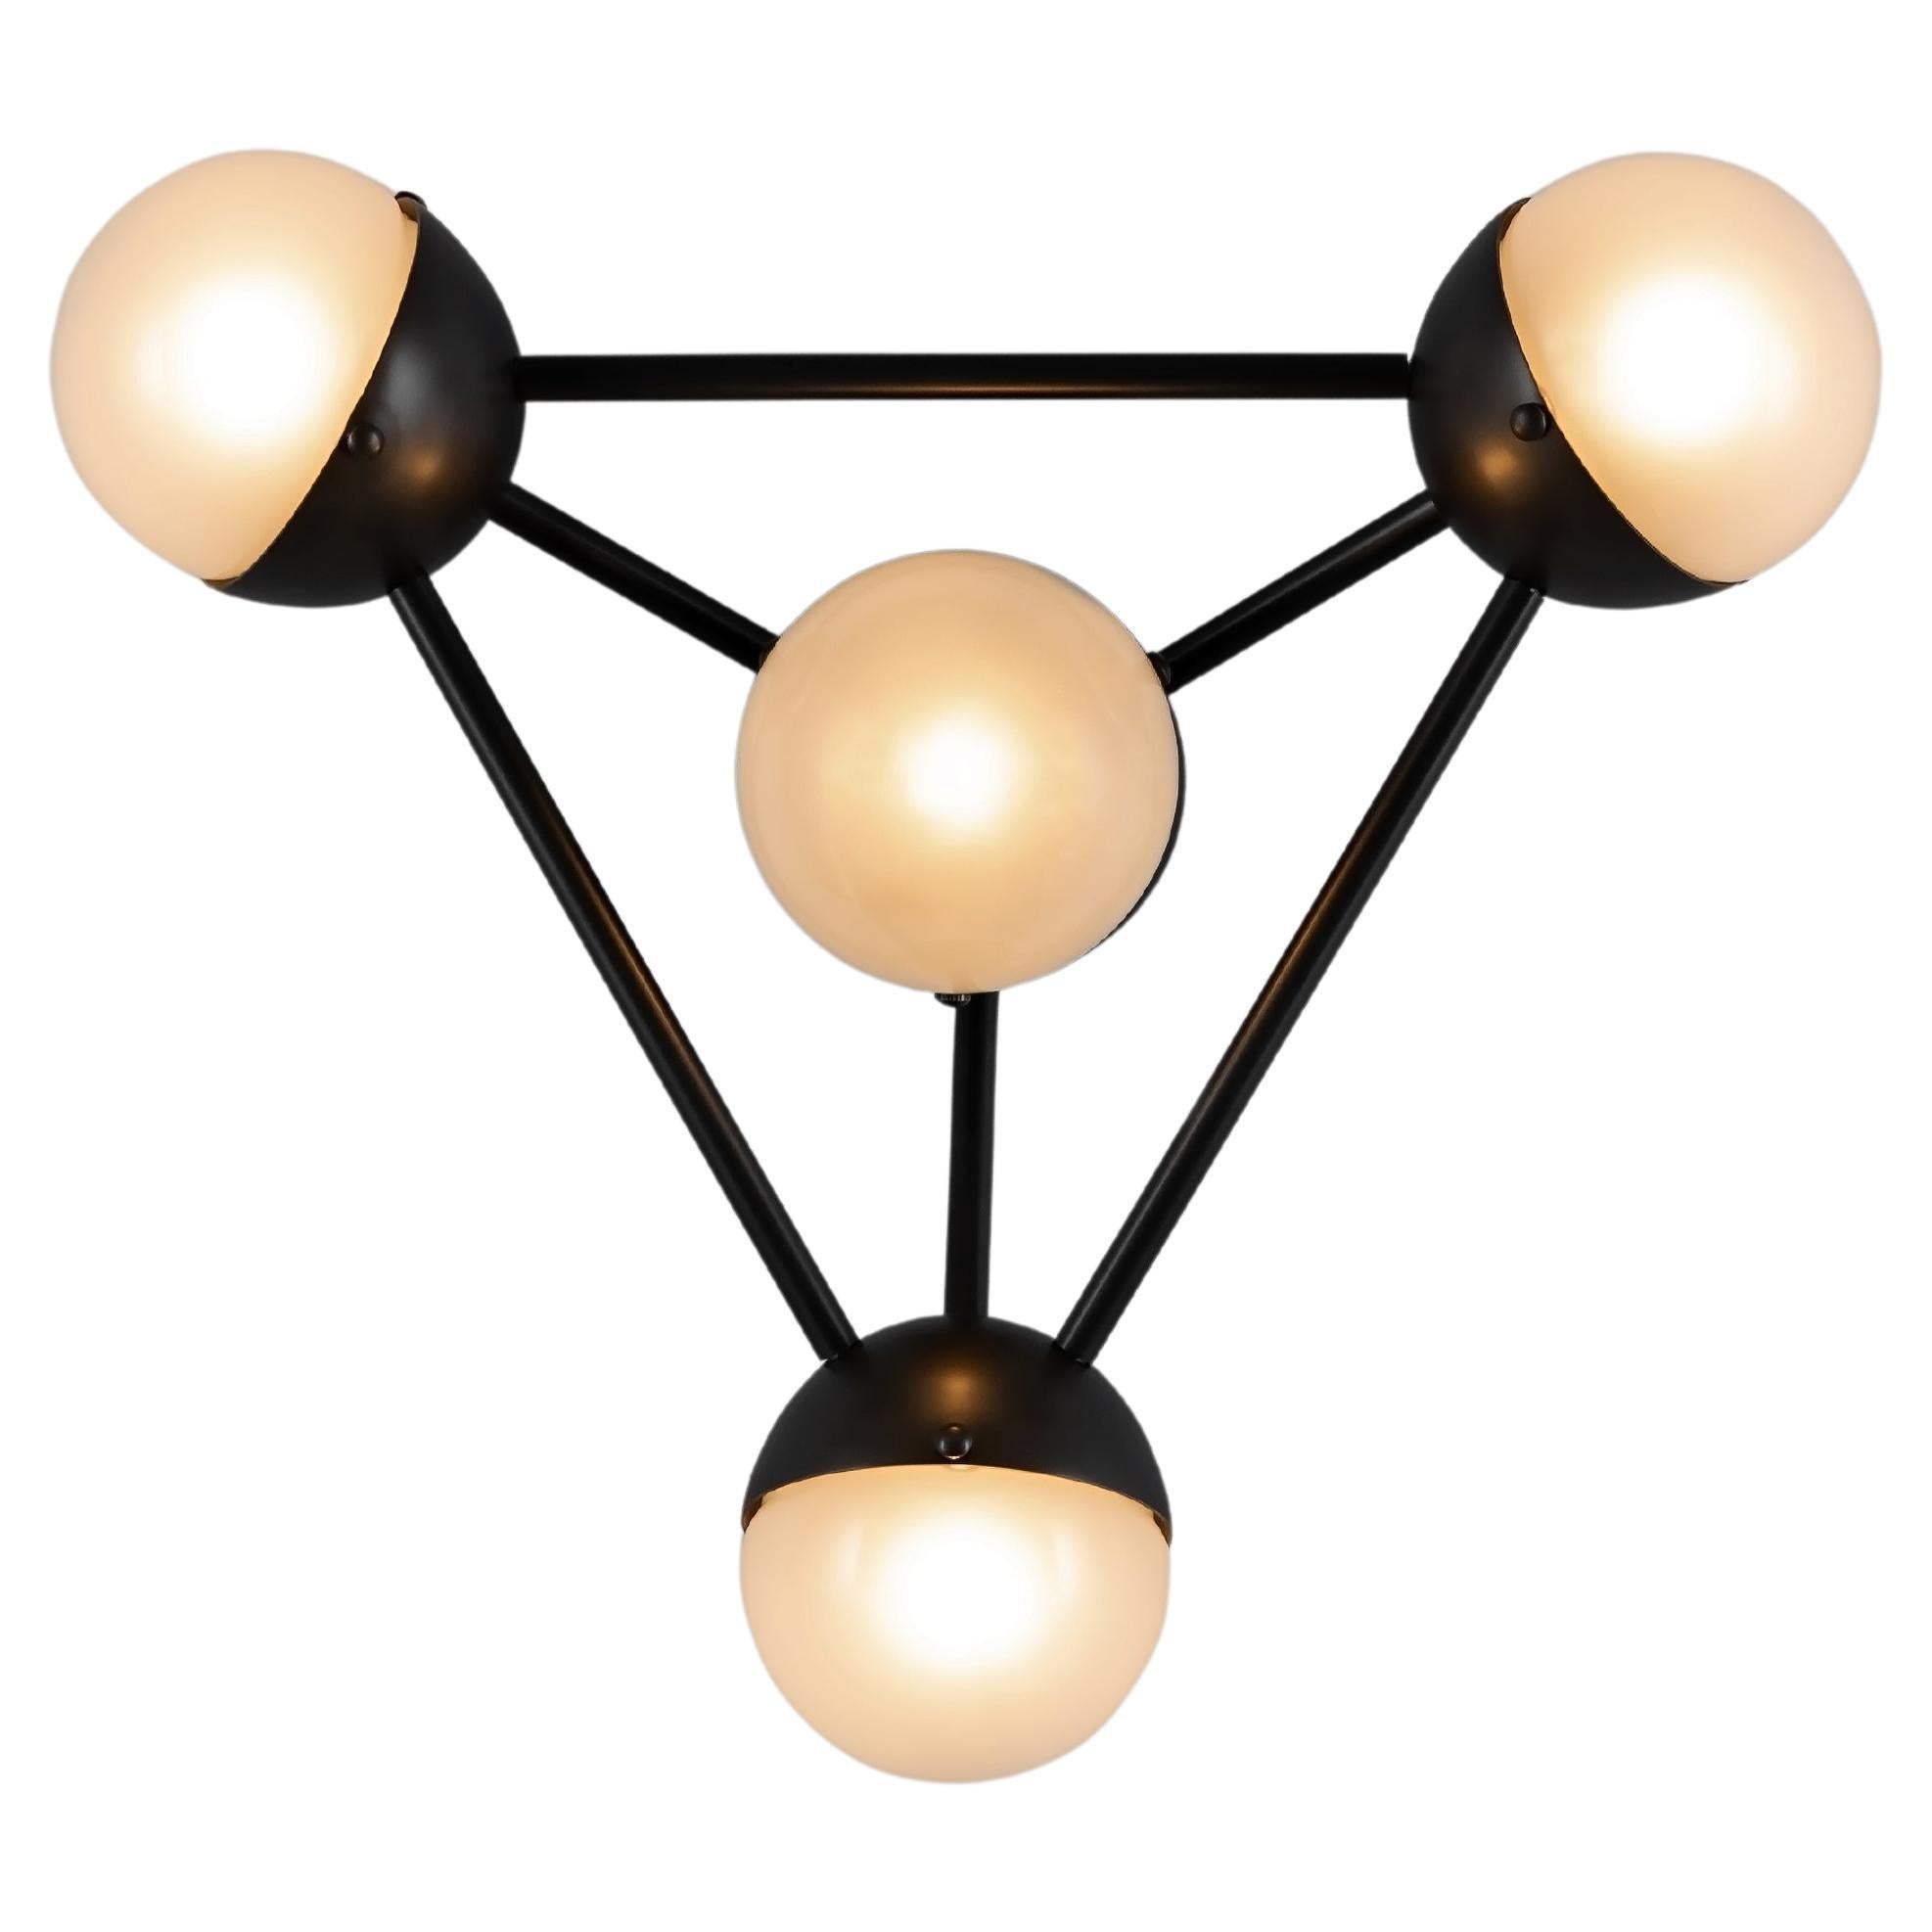 Molecule 4 Wall Sconce by Schwung For Sale